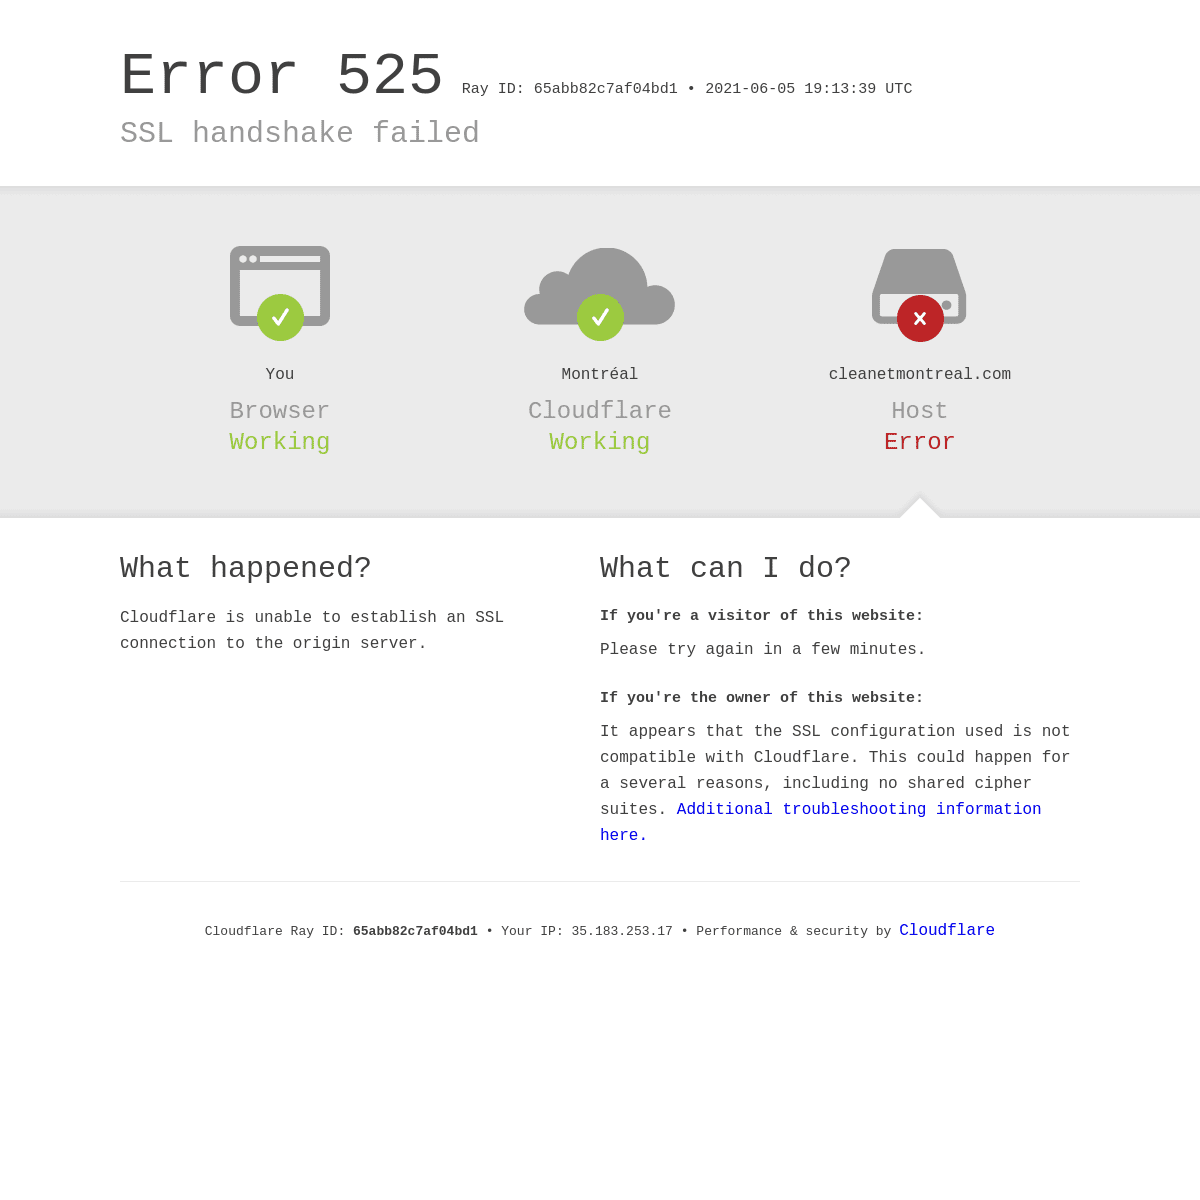 A complete backup of https://cleanetmontreal.com